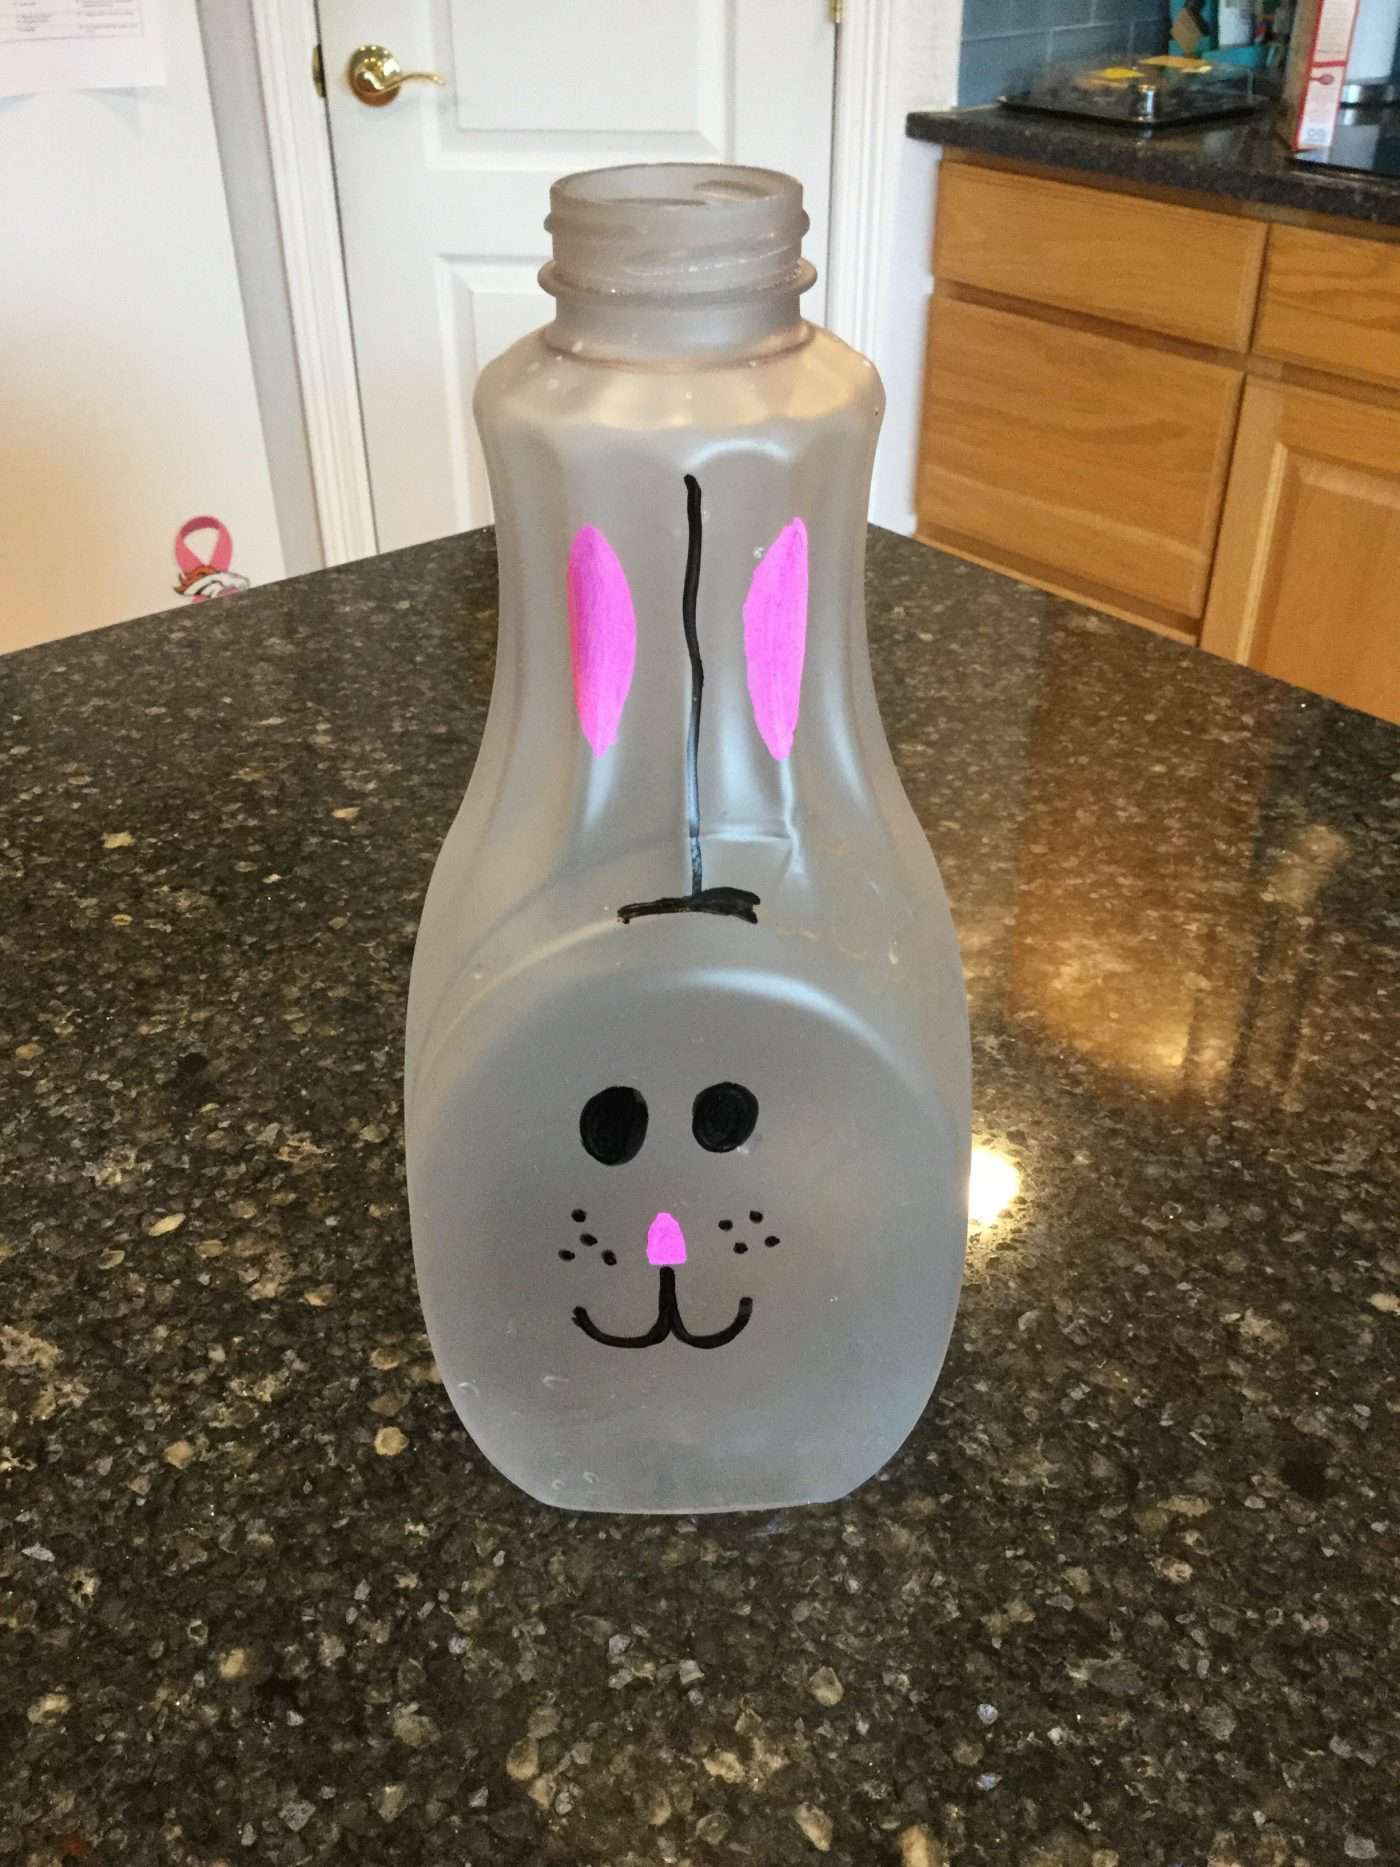 I drew on the bunny face with my Sharpies.